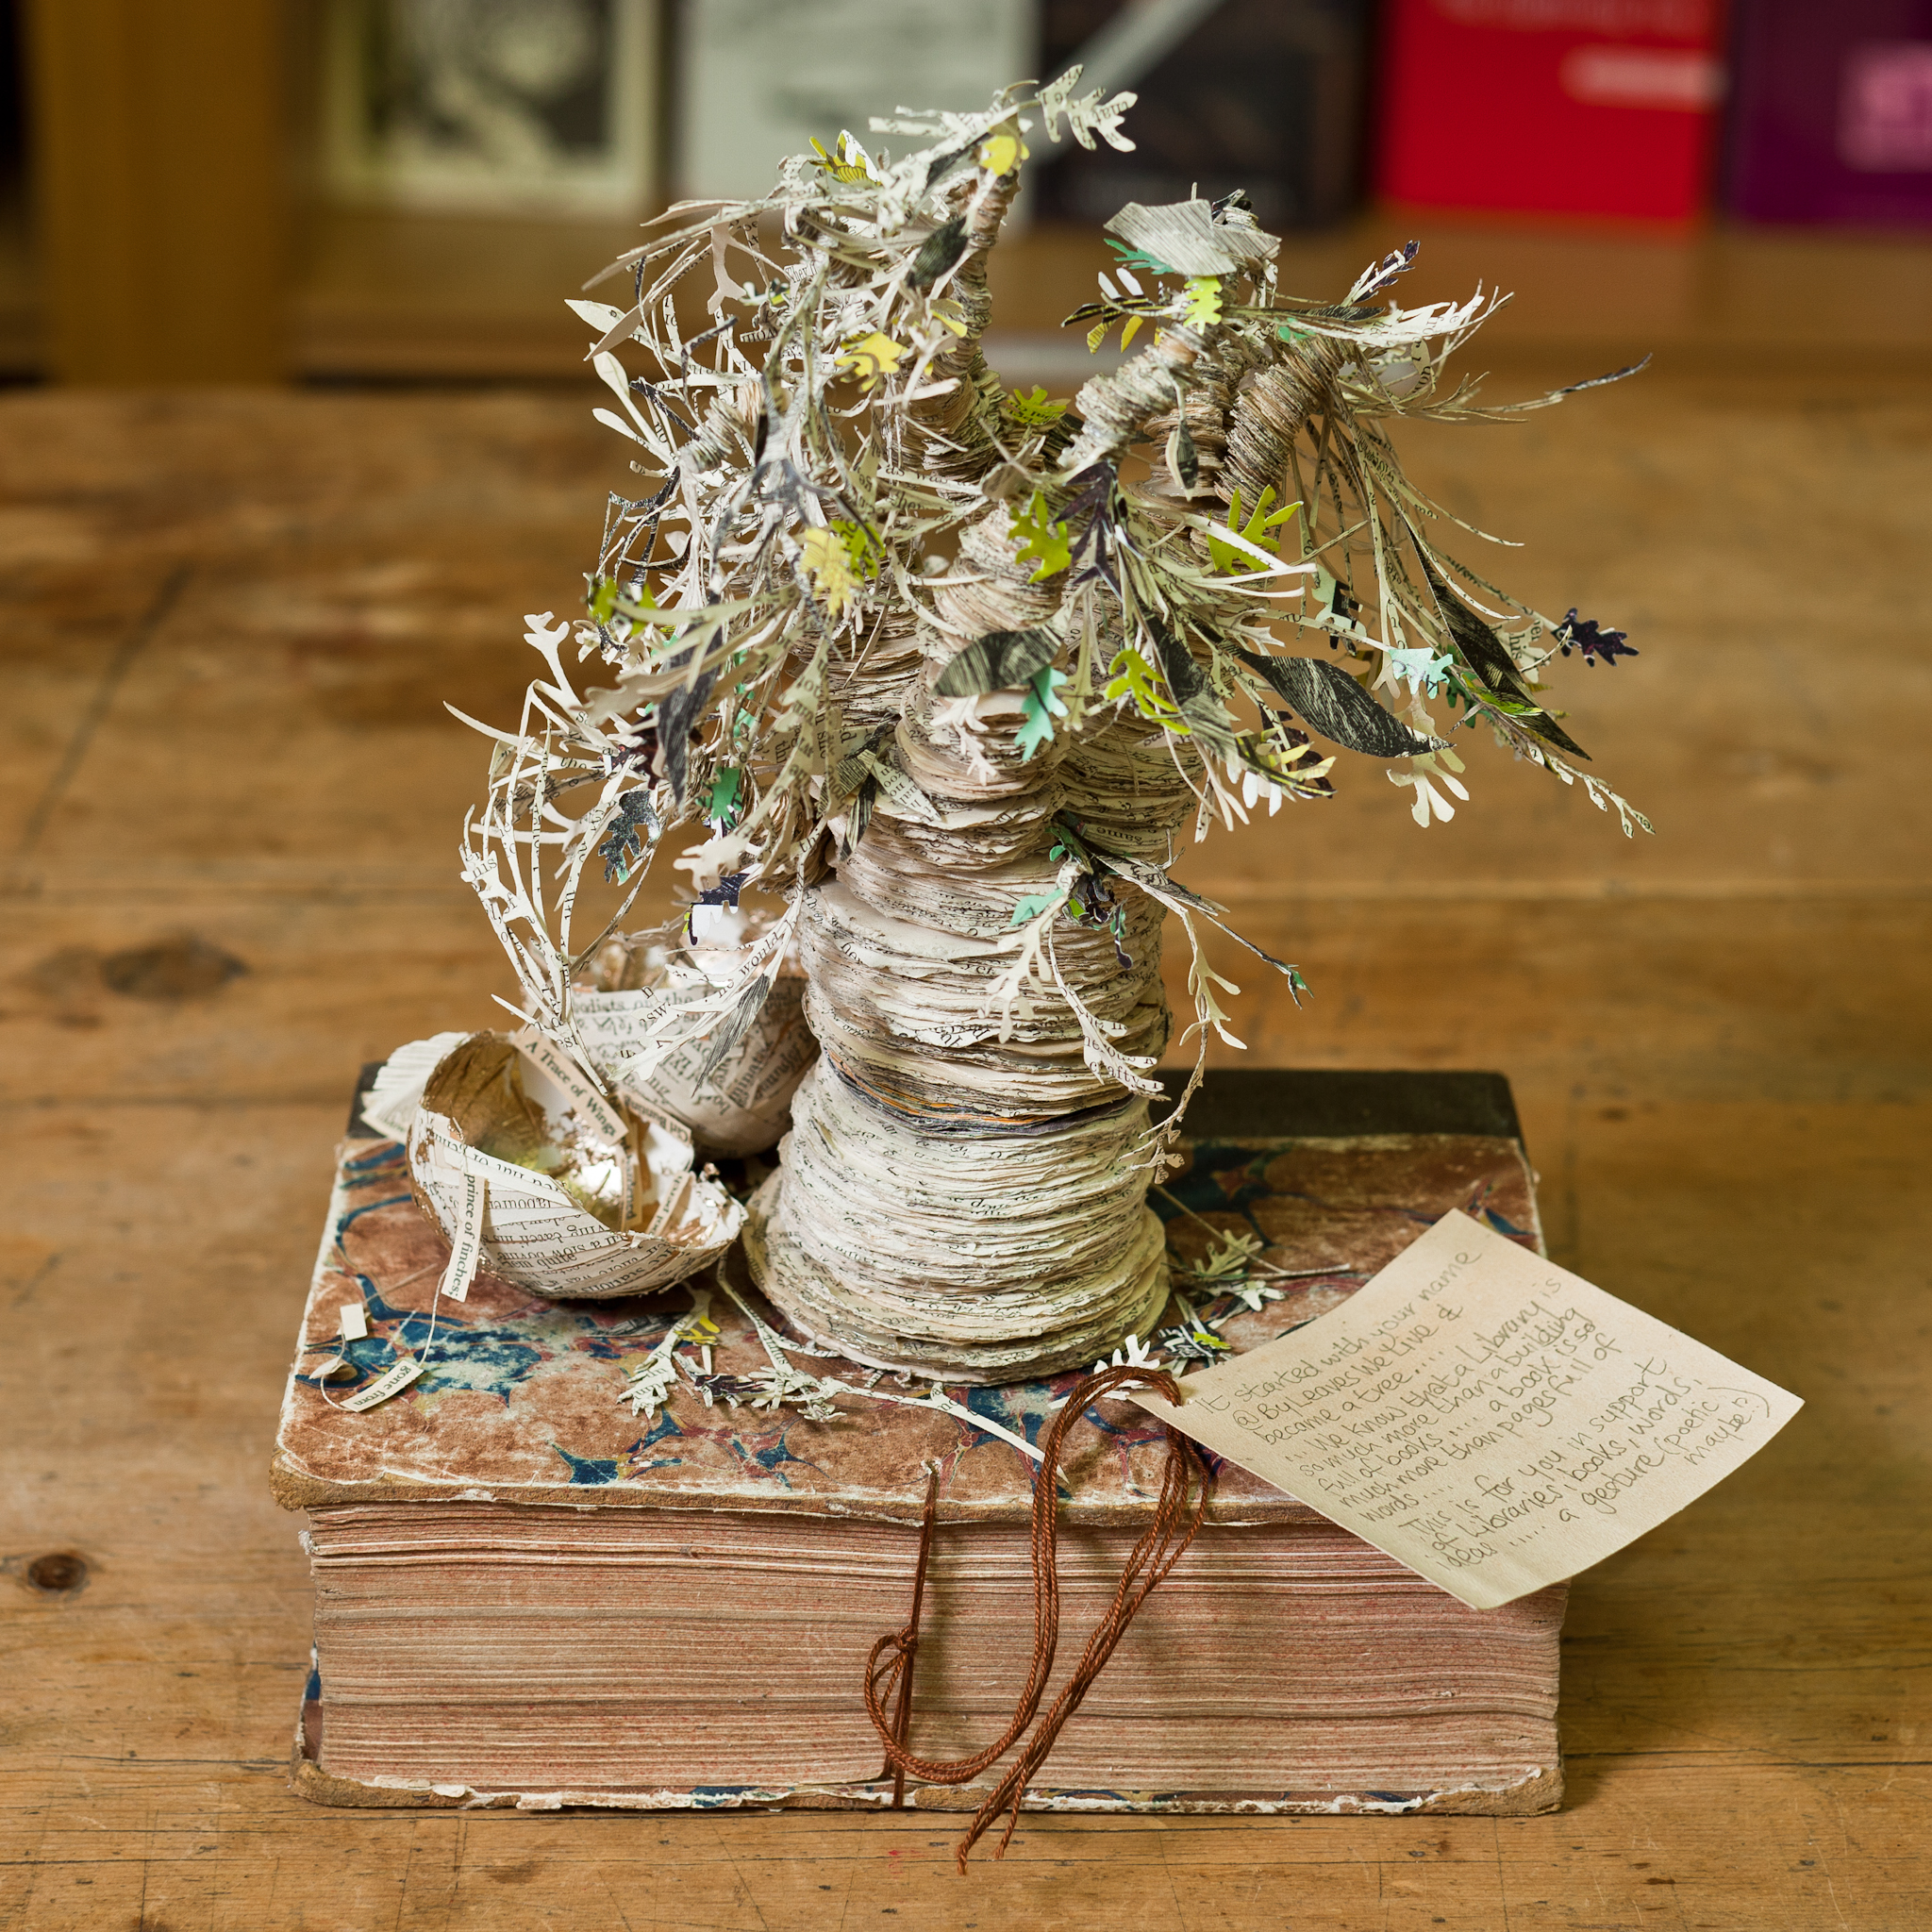 A sculpture made from a book in the shape of a tree